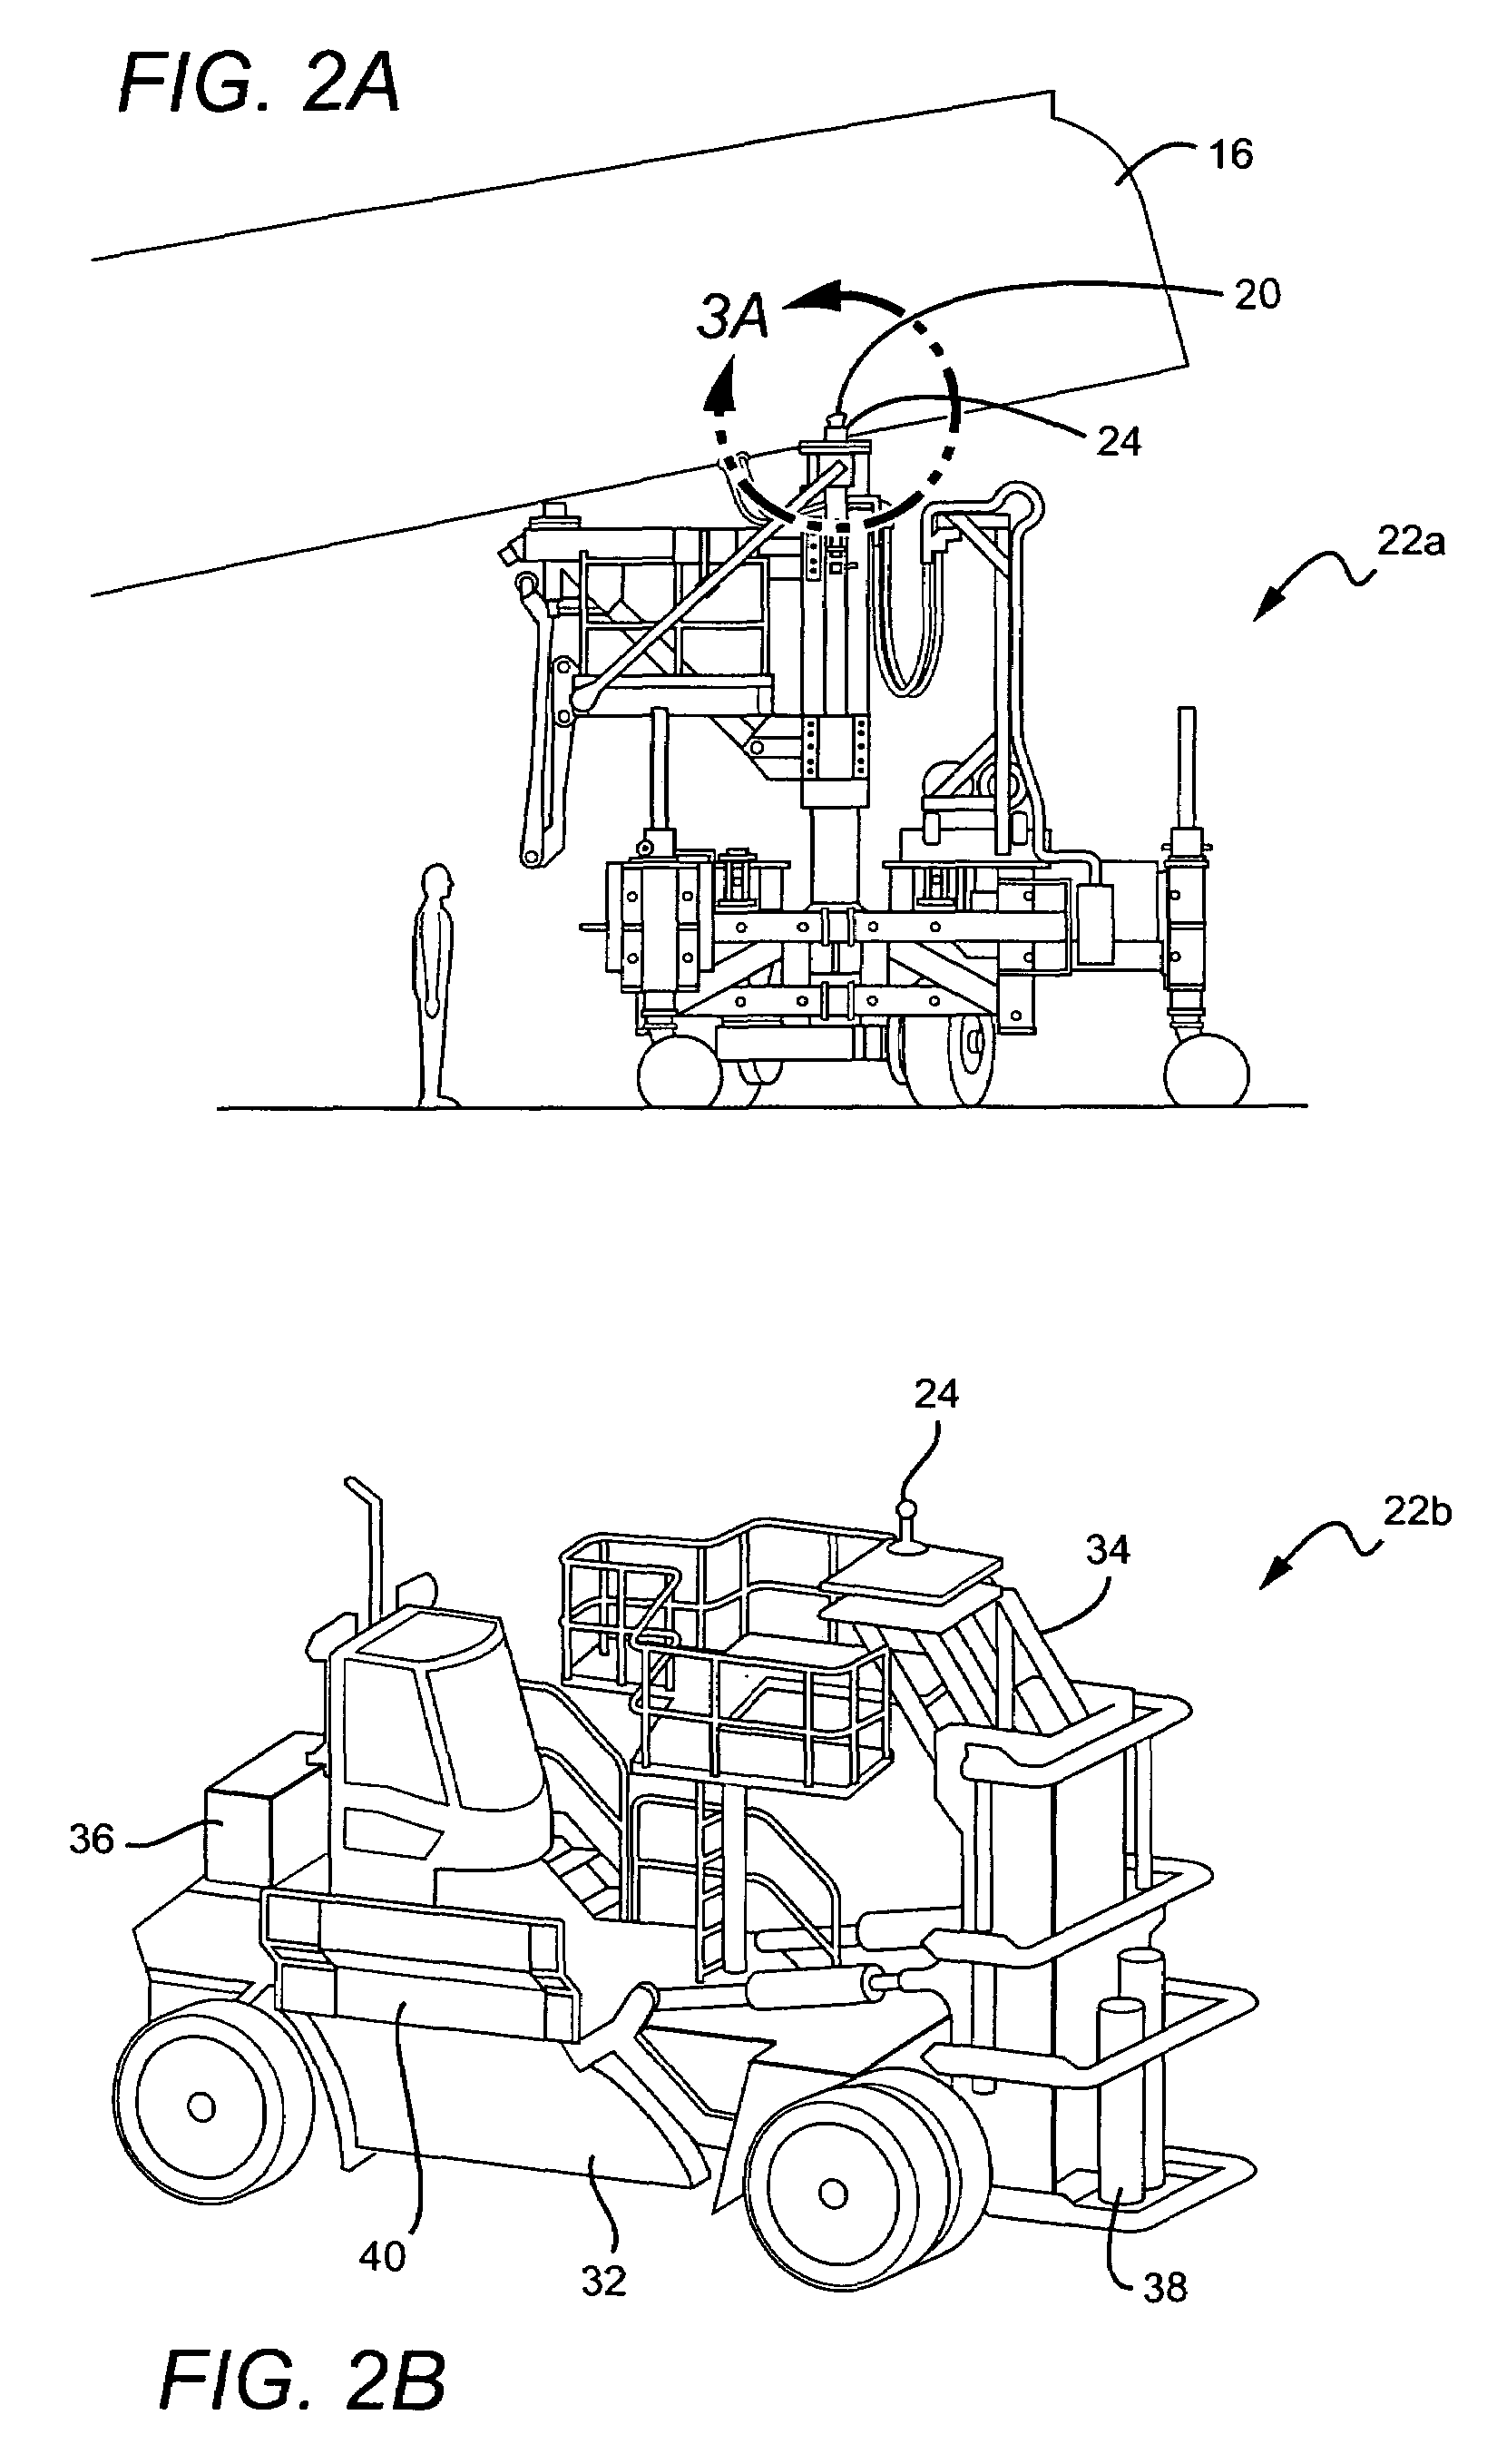 Actuation system for tail section of aircraft